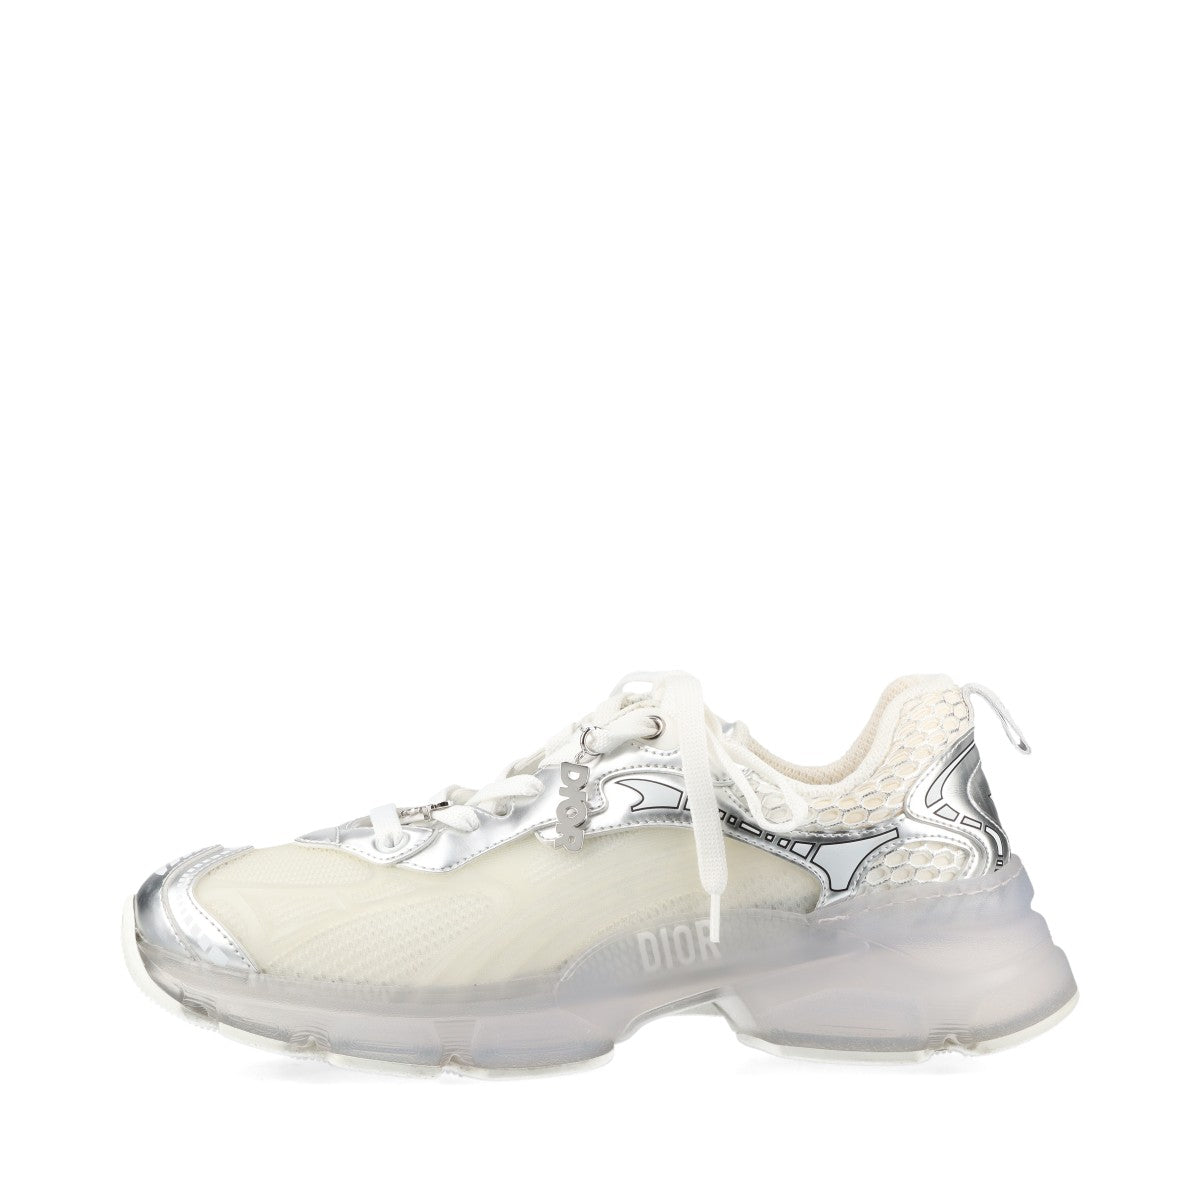 Christian Dior DIOR VIBE Leather × Rubber Sneakers 39.5 Ladies' silver x white Mesh logo charm